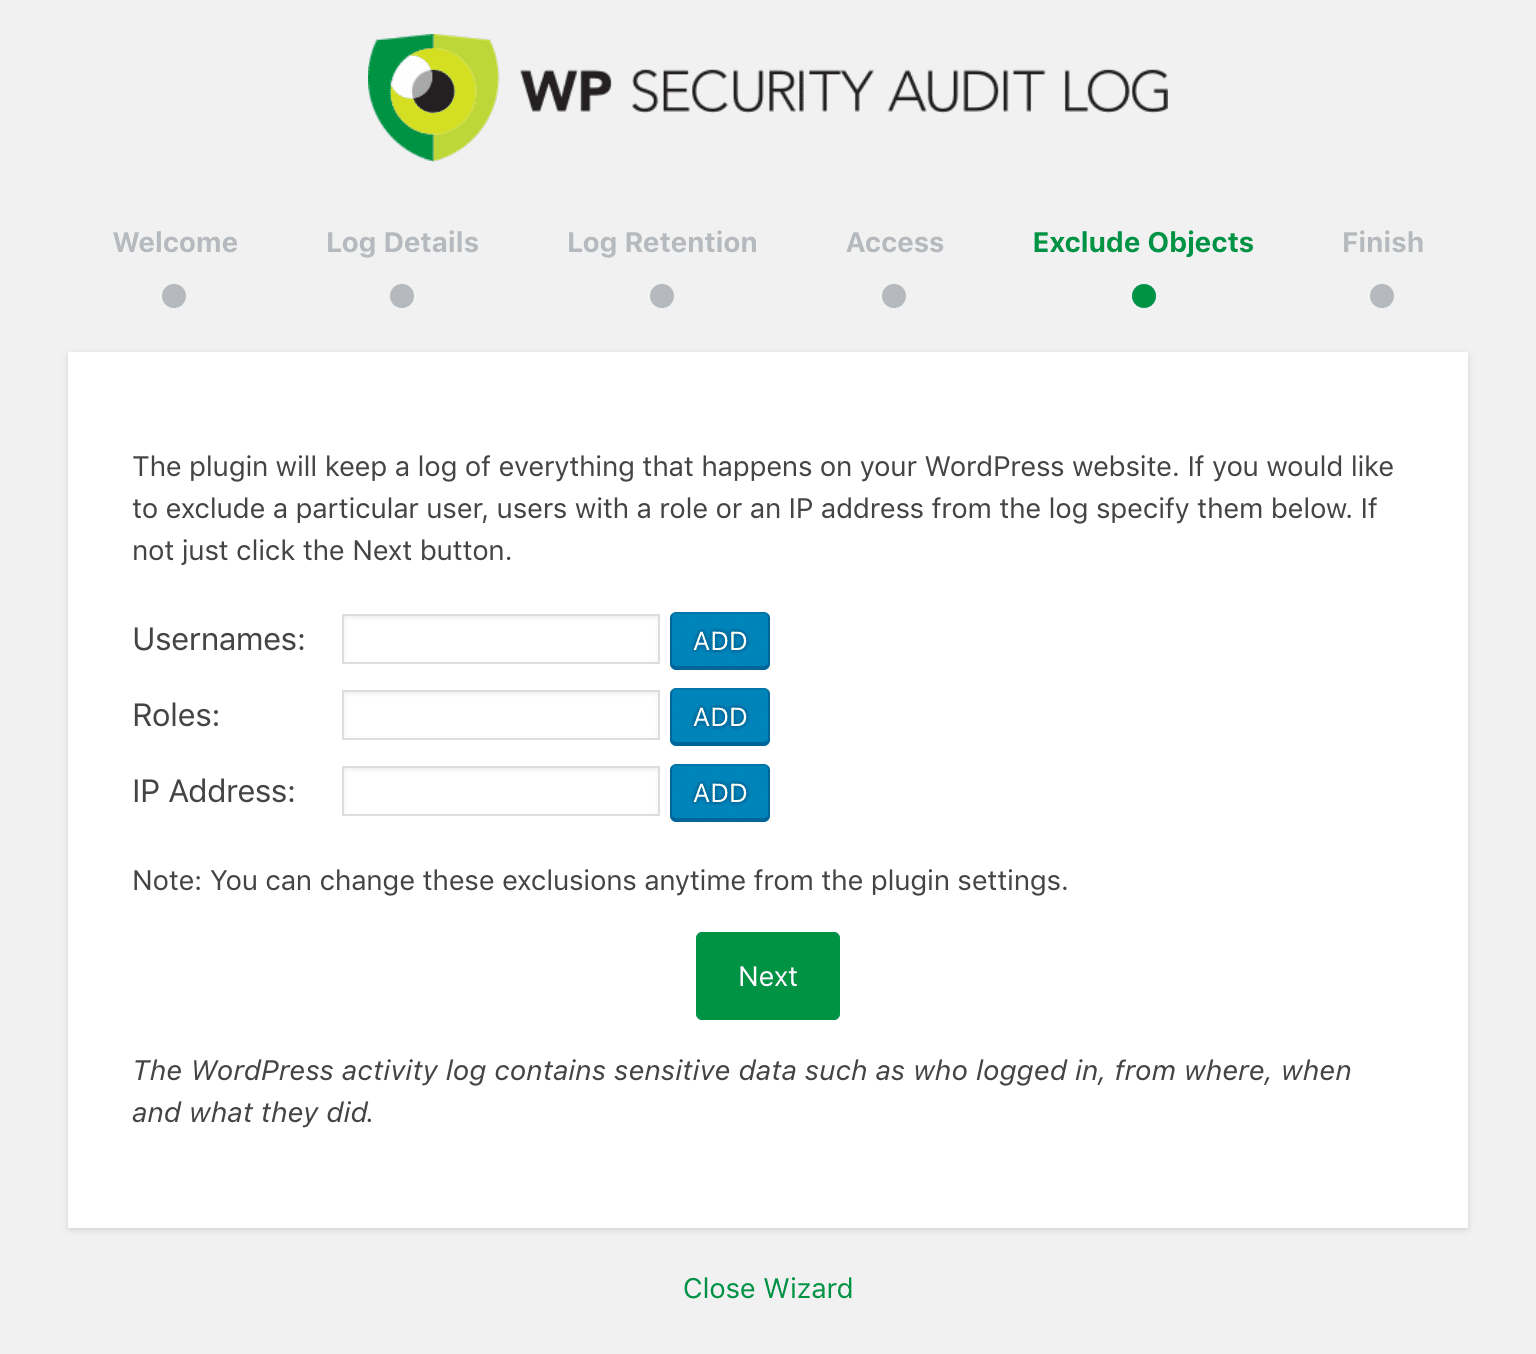 WP Security Audit Log exclude Objects